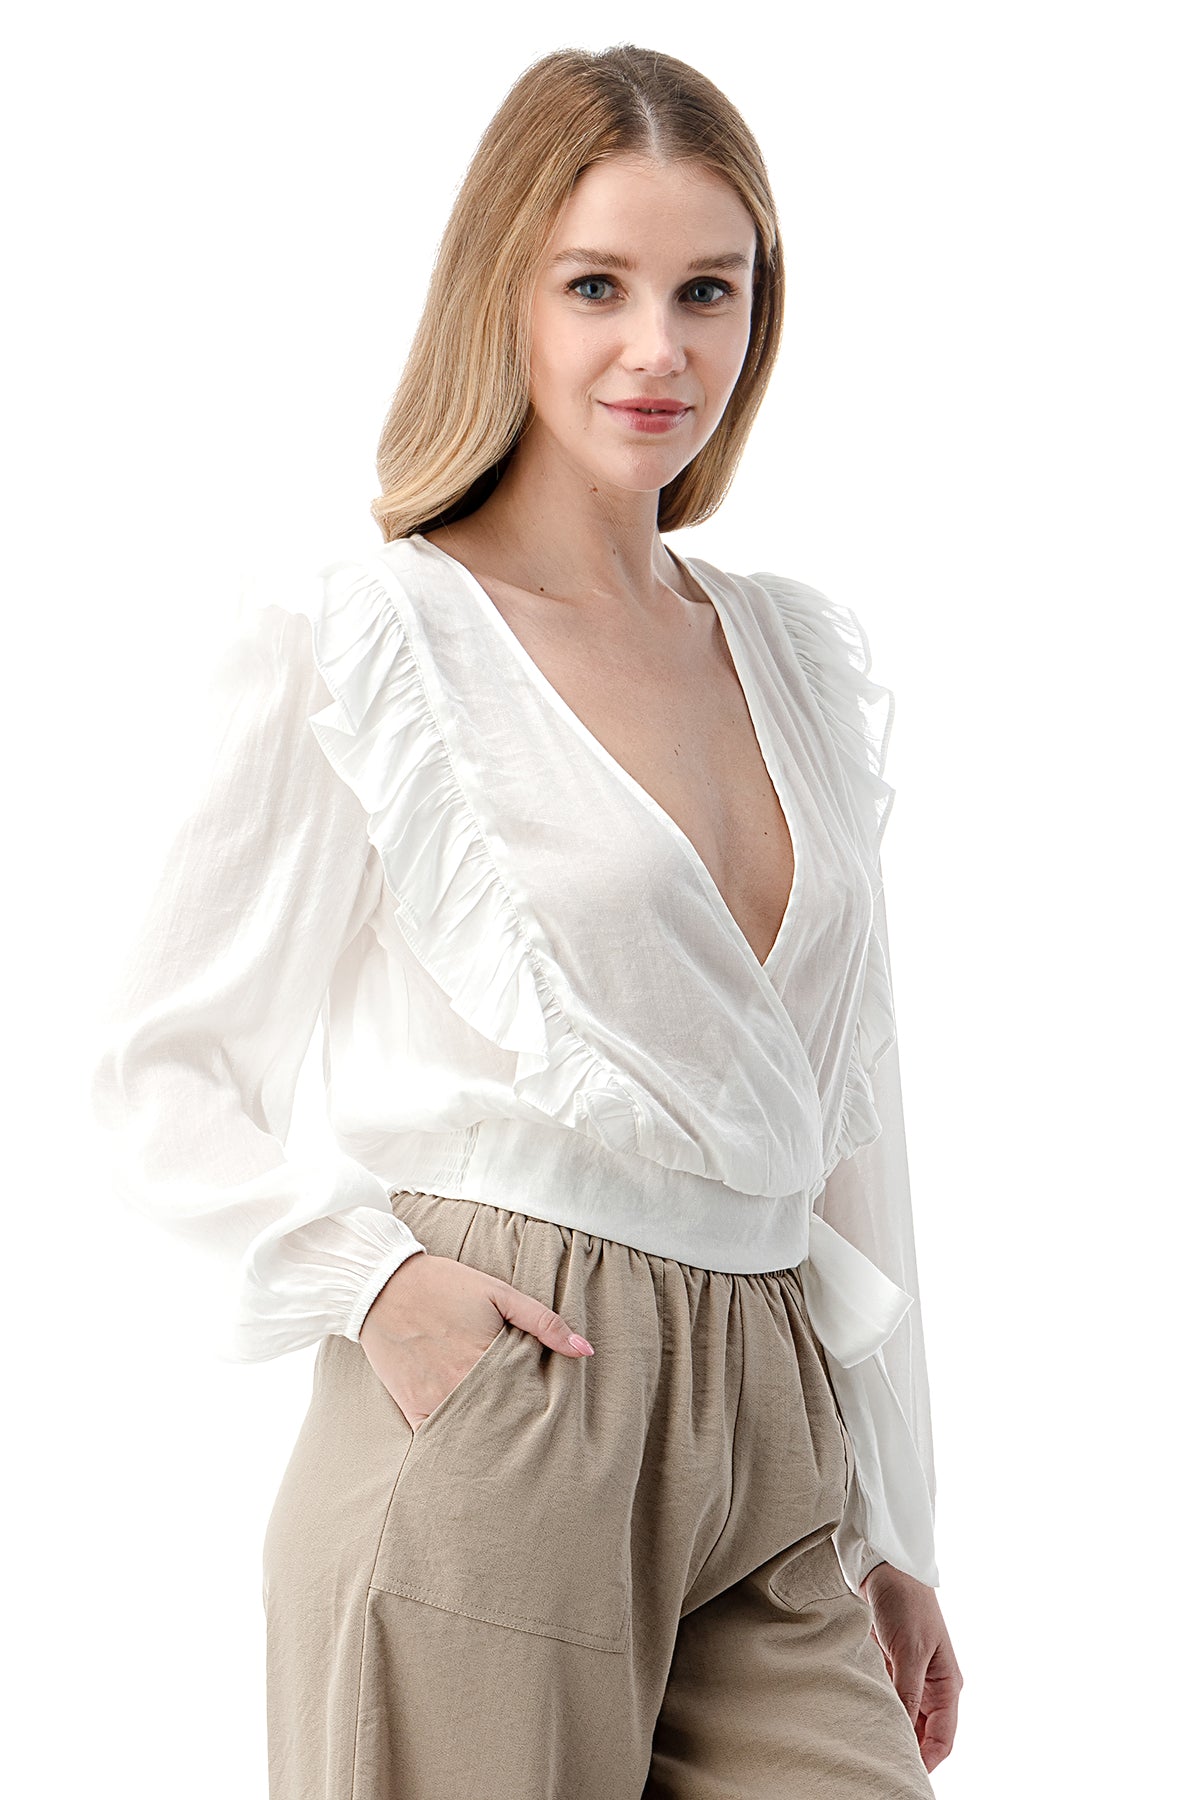 EDGY Land Girl's and Women's Ruffled Front Tie Smocked Bottom V-Neck Long Sleeve Fashion Wrap Blouse